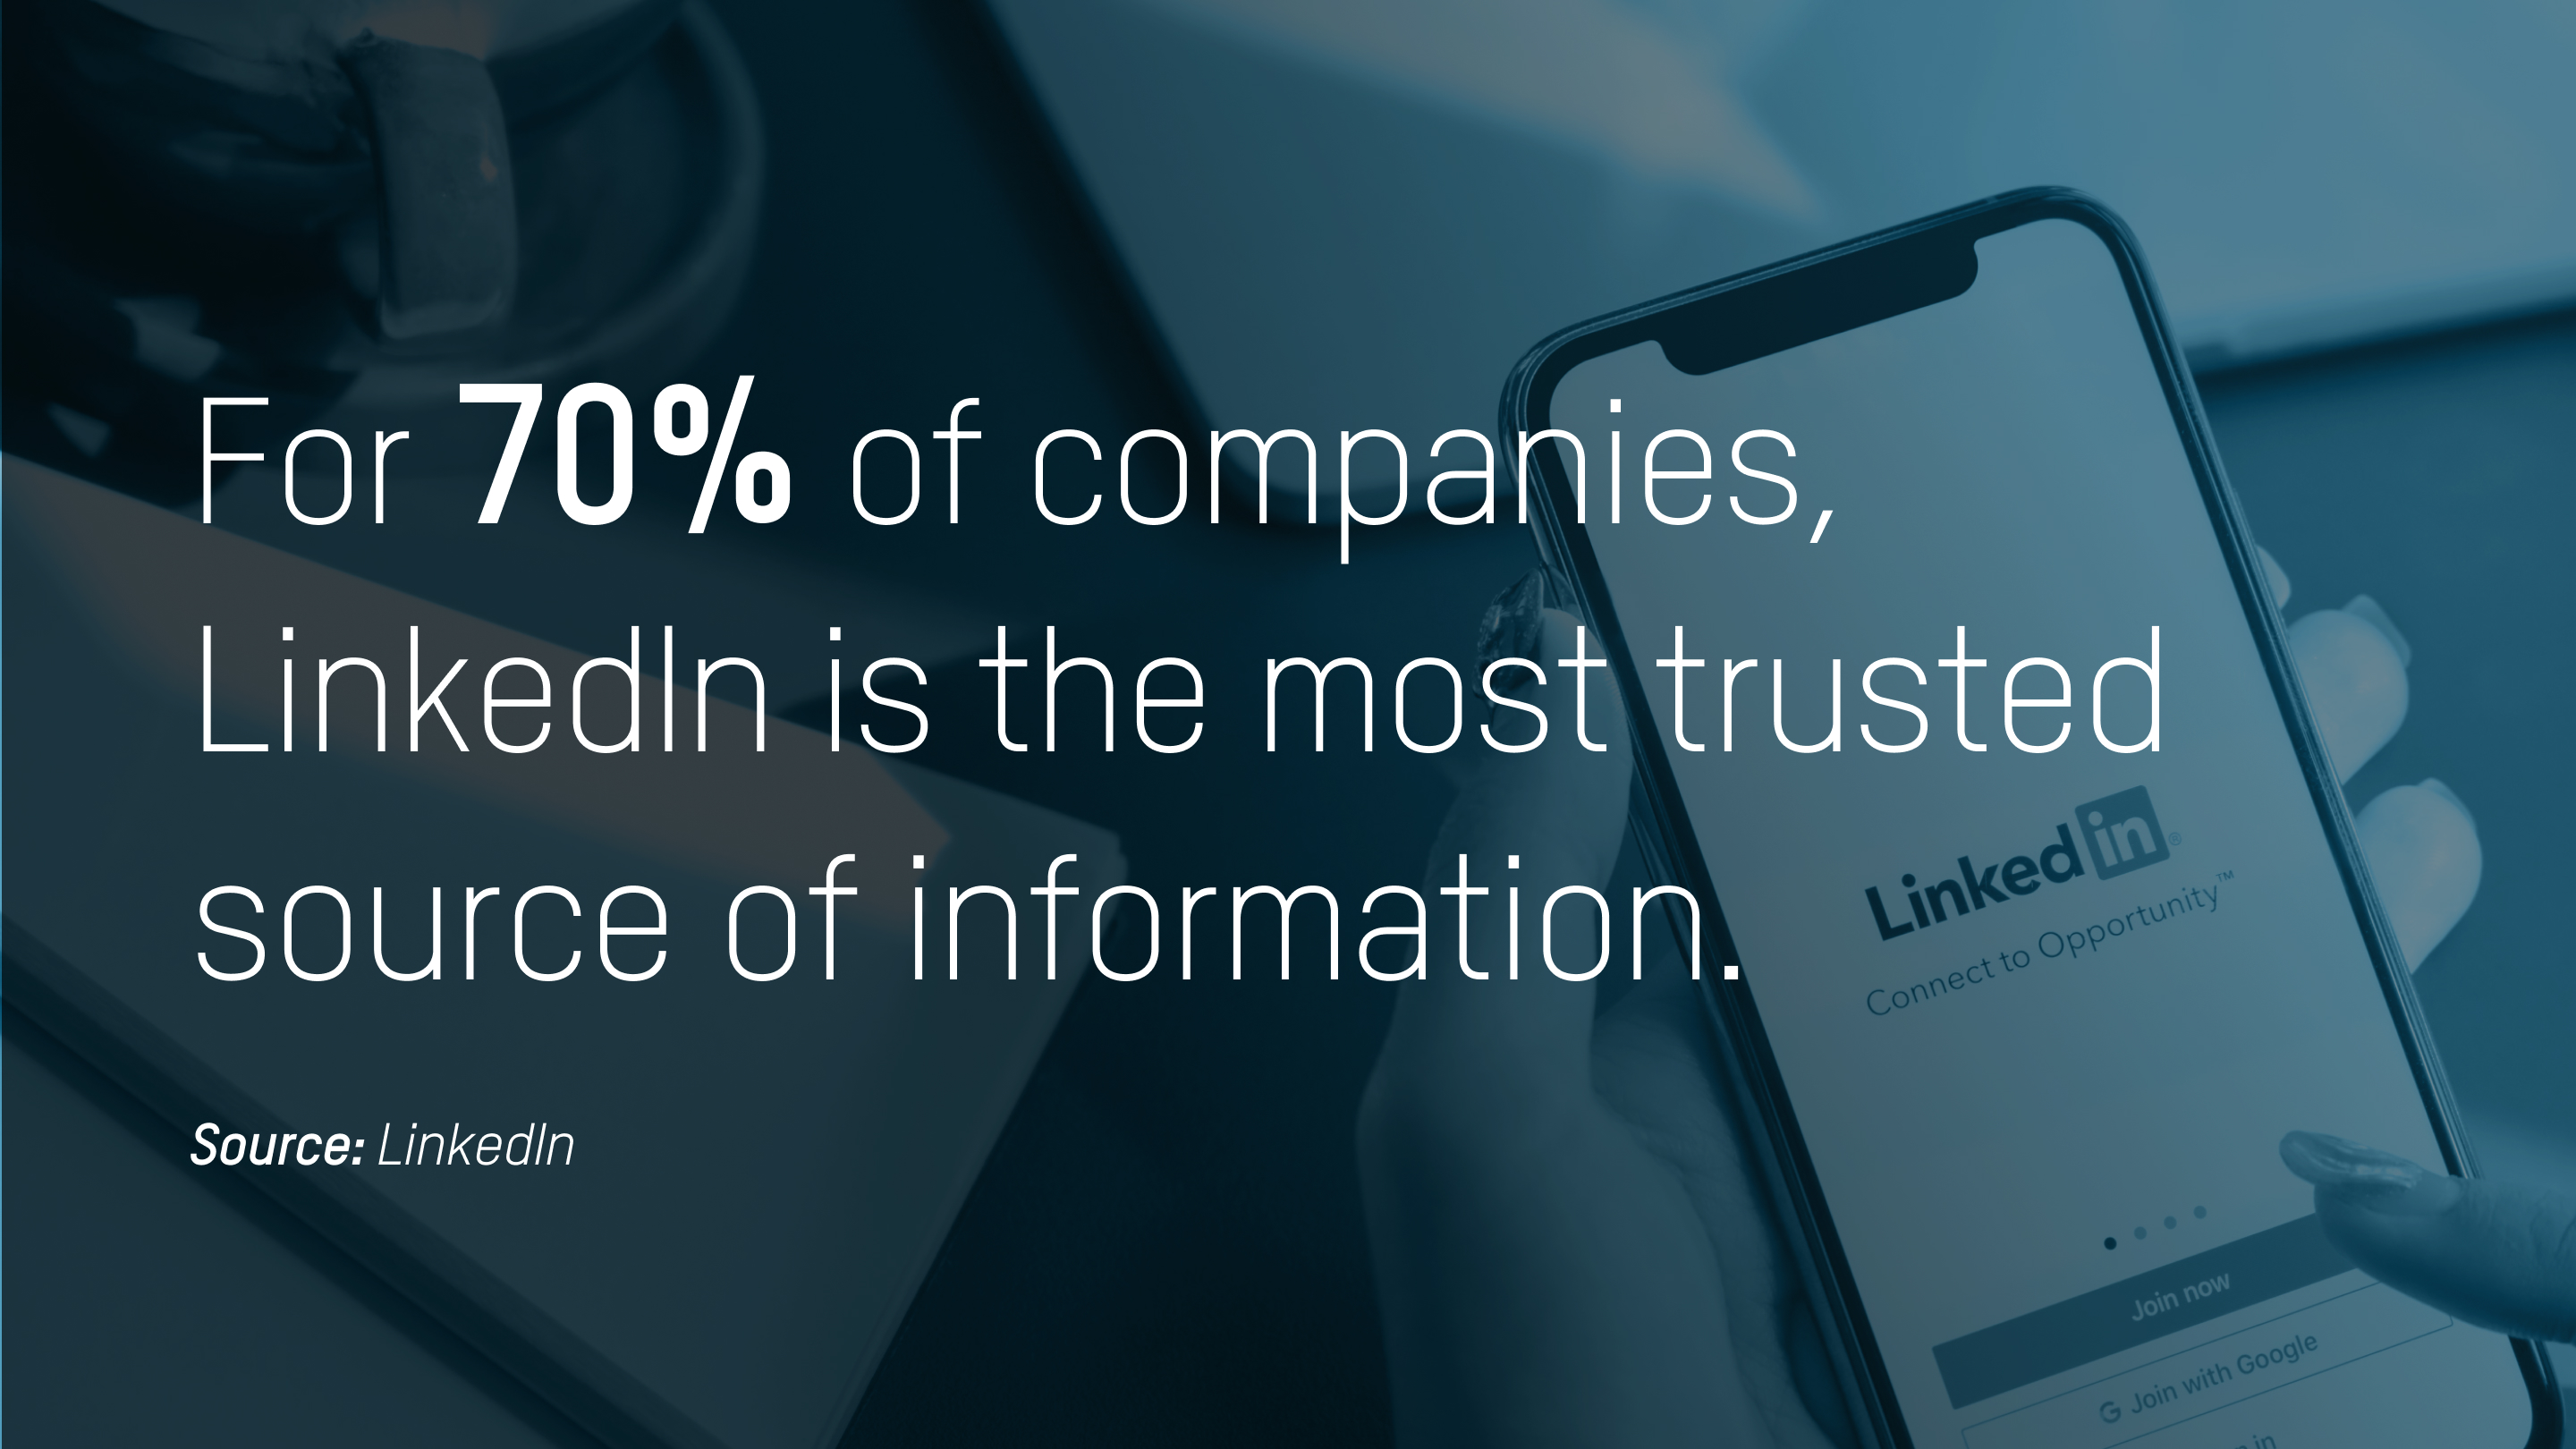 LinkedIn: Most trusted info source for 70% of firms